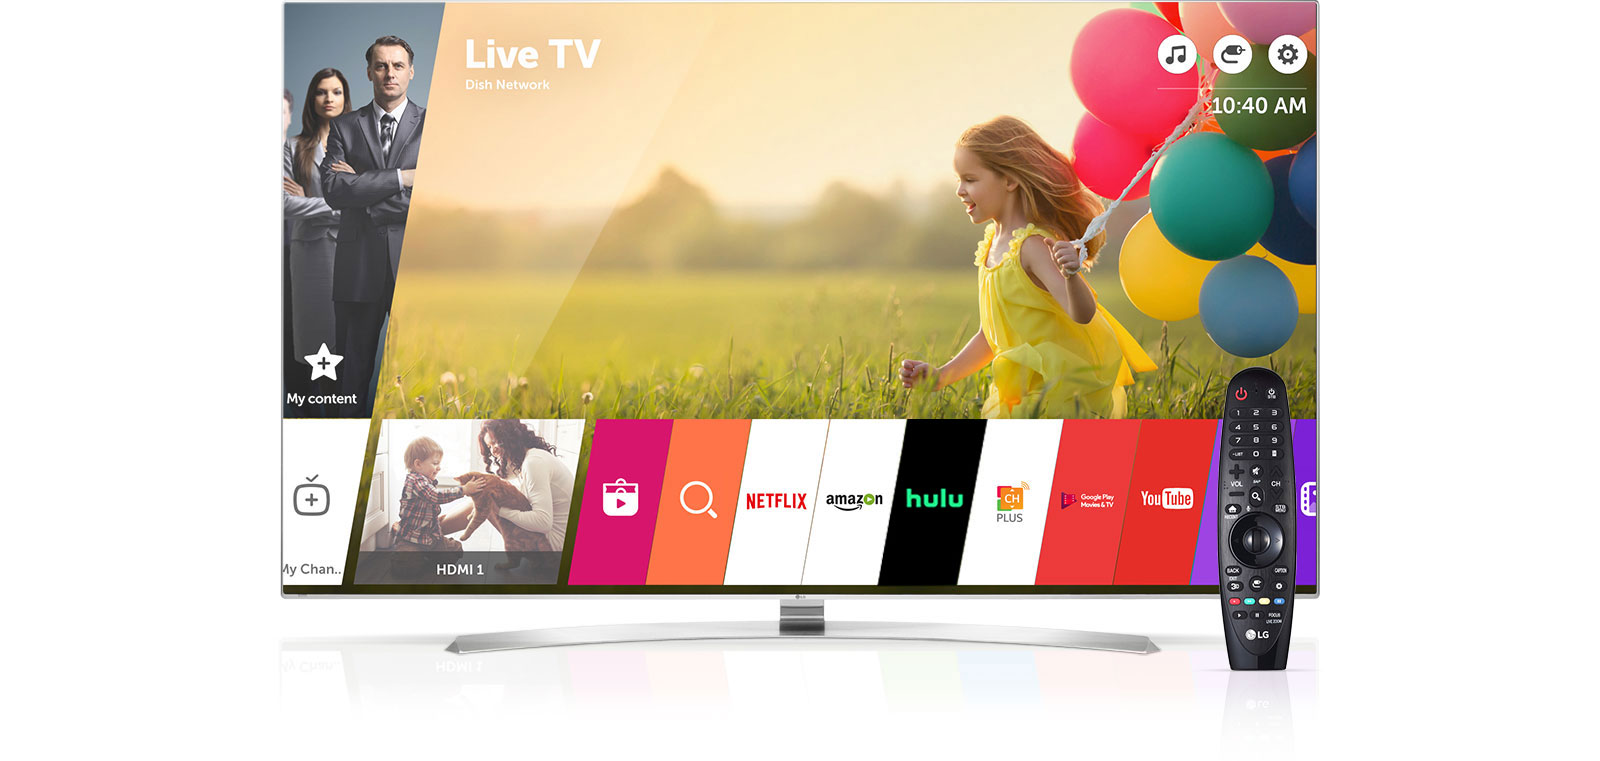 What OS Is LG Smart TV